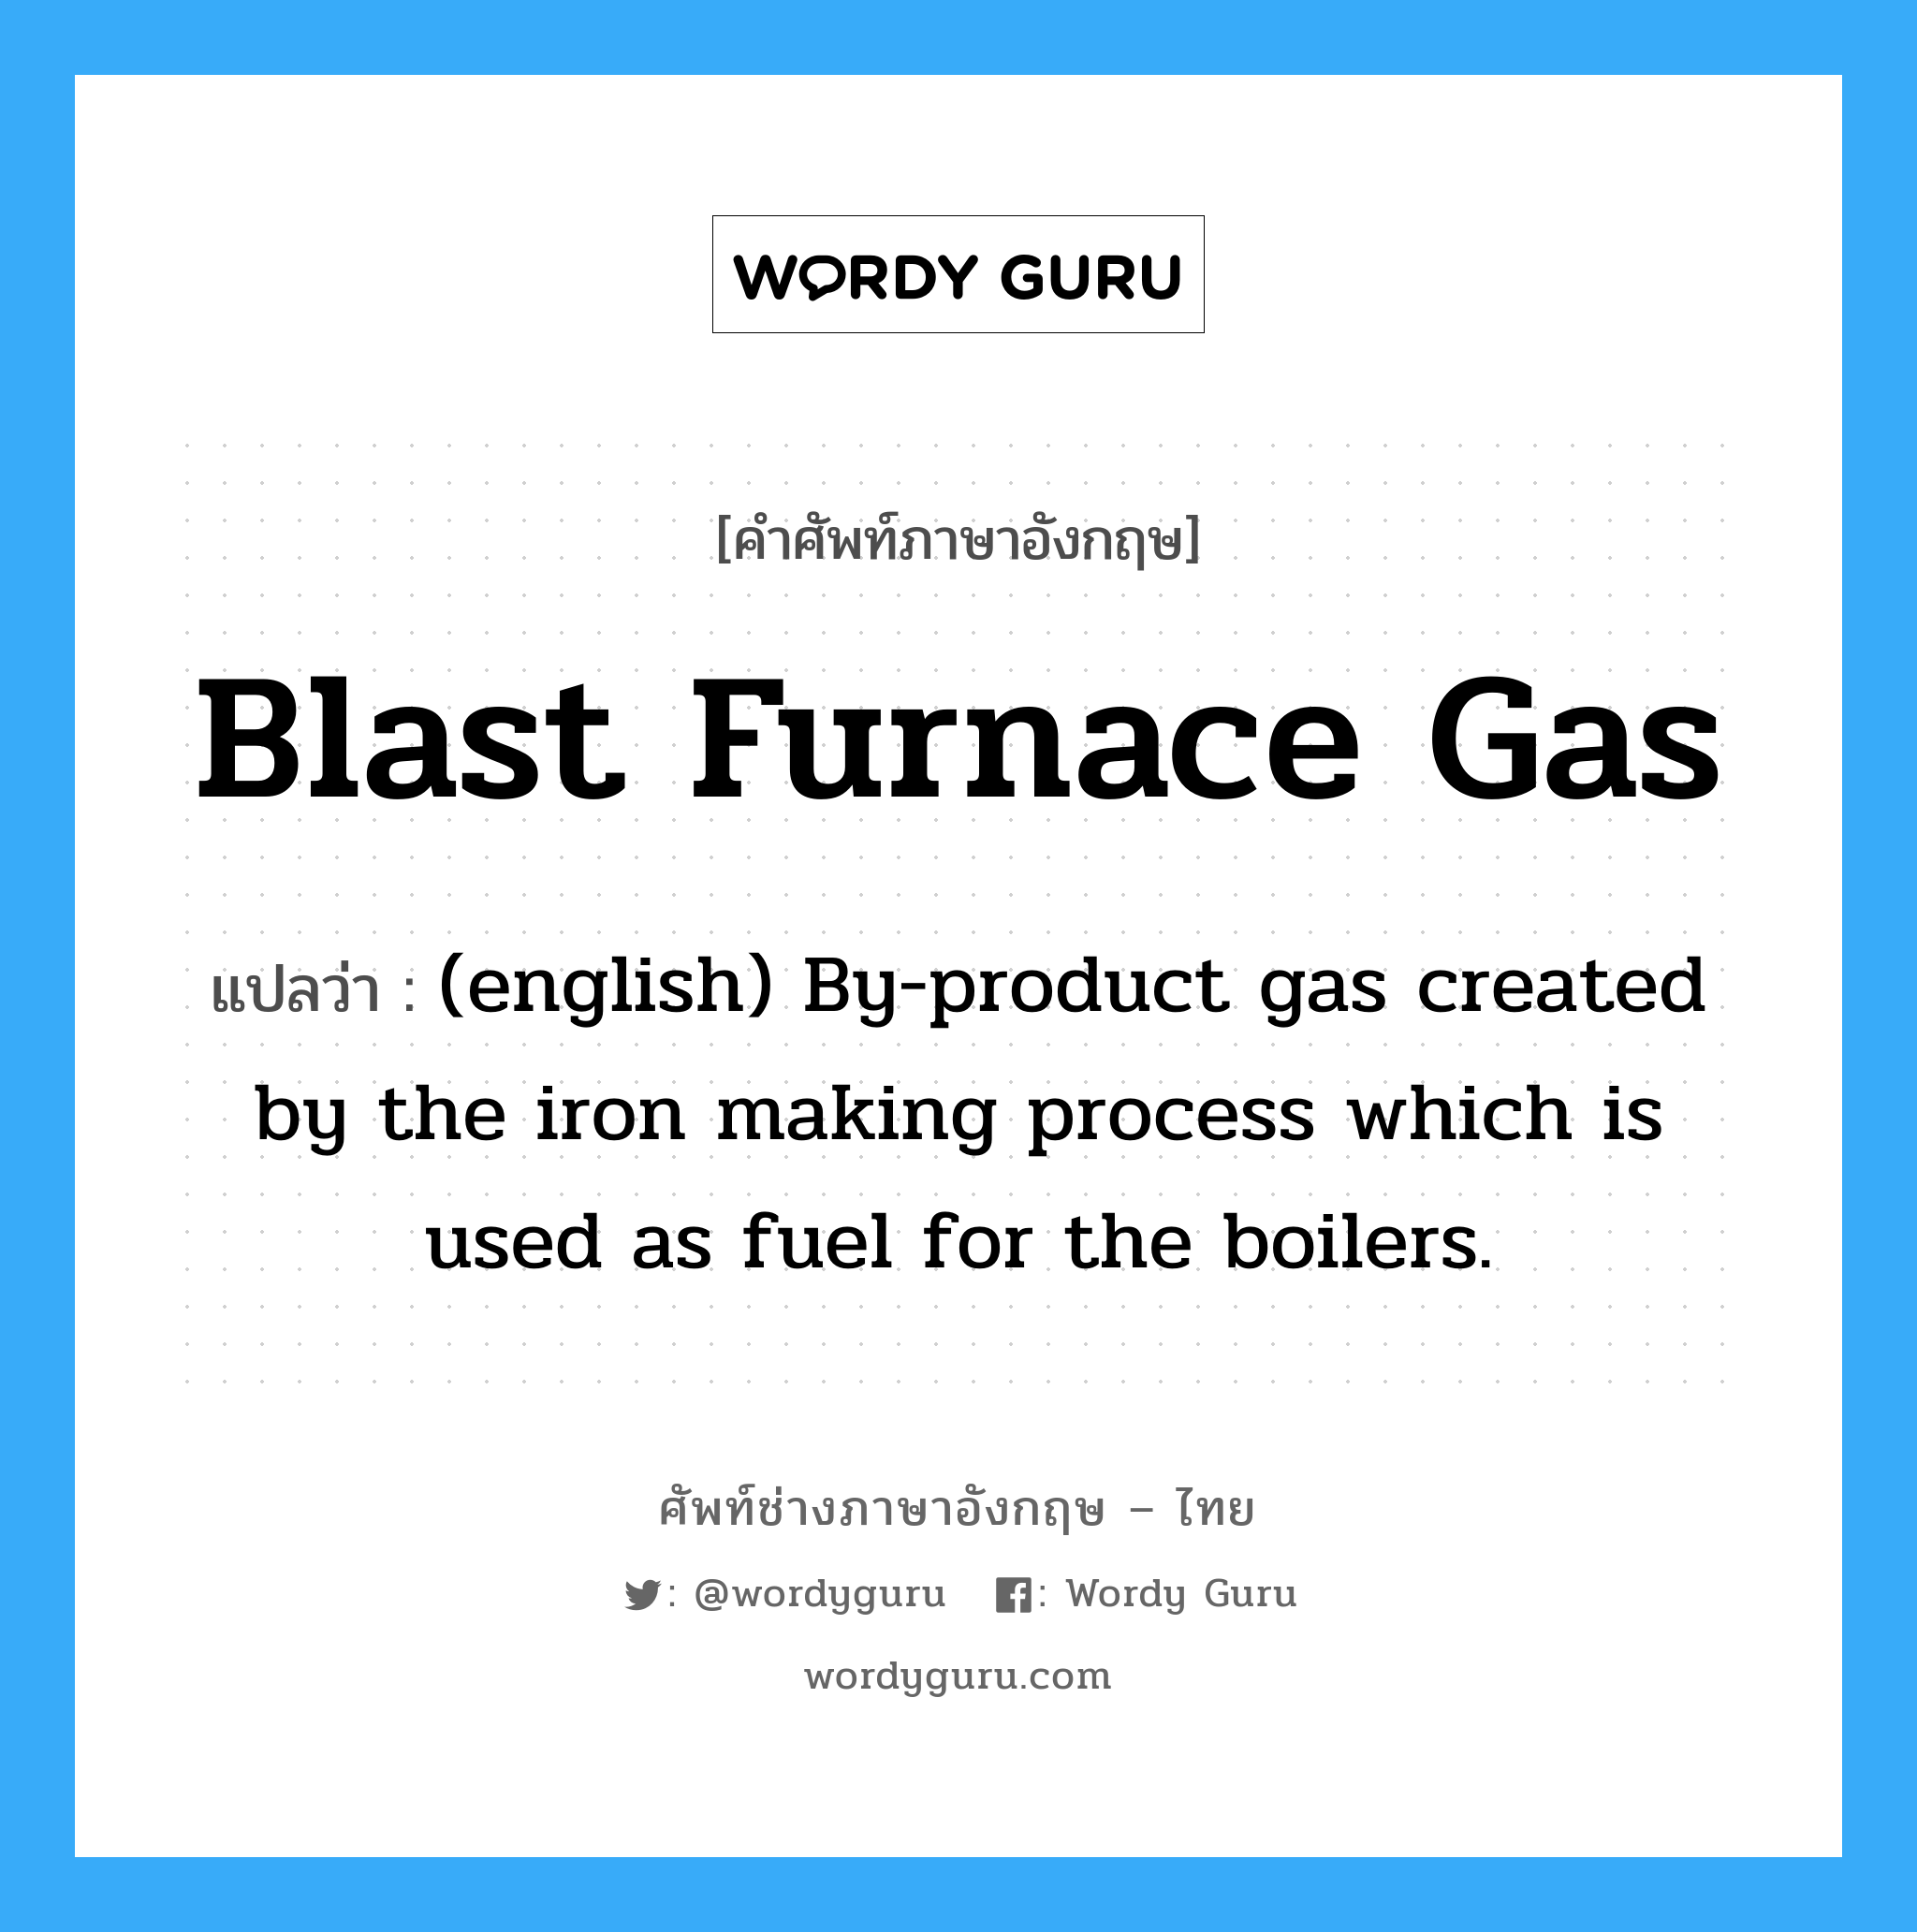 Blast Furnace Gas แปลว่า?, คำศัพท์ช่างภาษาอังกฤษ - ไทย Blast Furnace Gas คำศัพท์ภาษาอังกฤษ Blast Furnace Gas แปลว่า (english) By-product gas created by the iron making process which is used as fuel for the boilers.